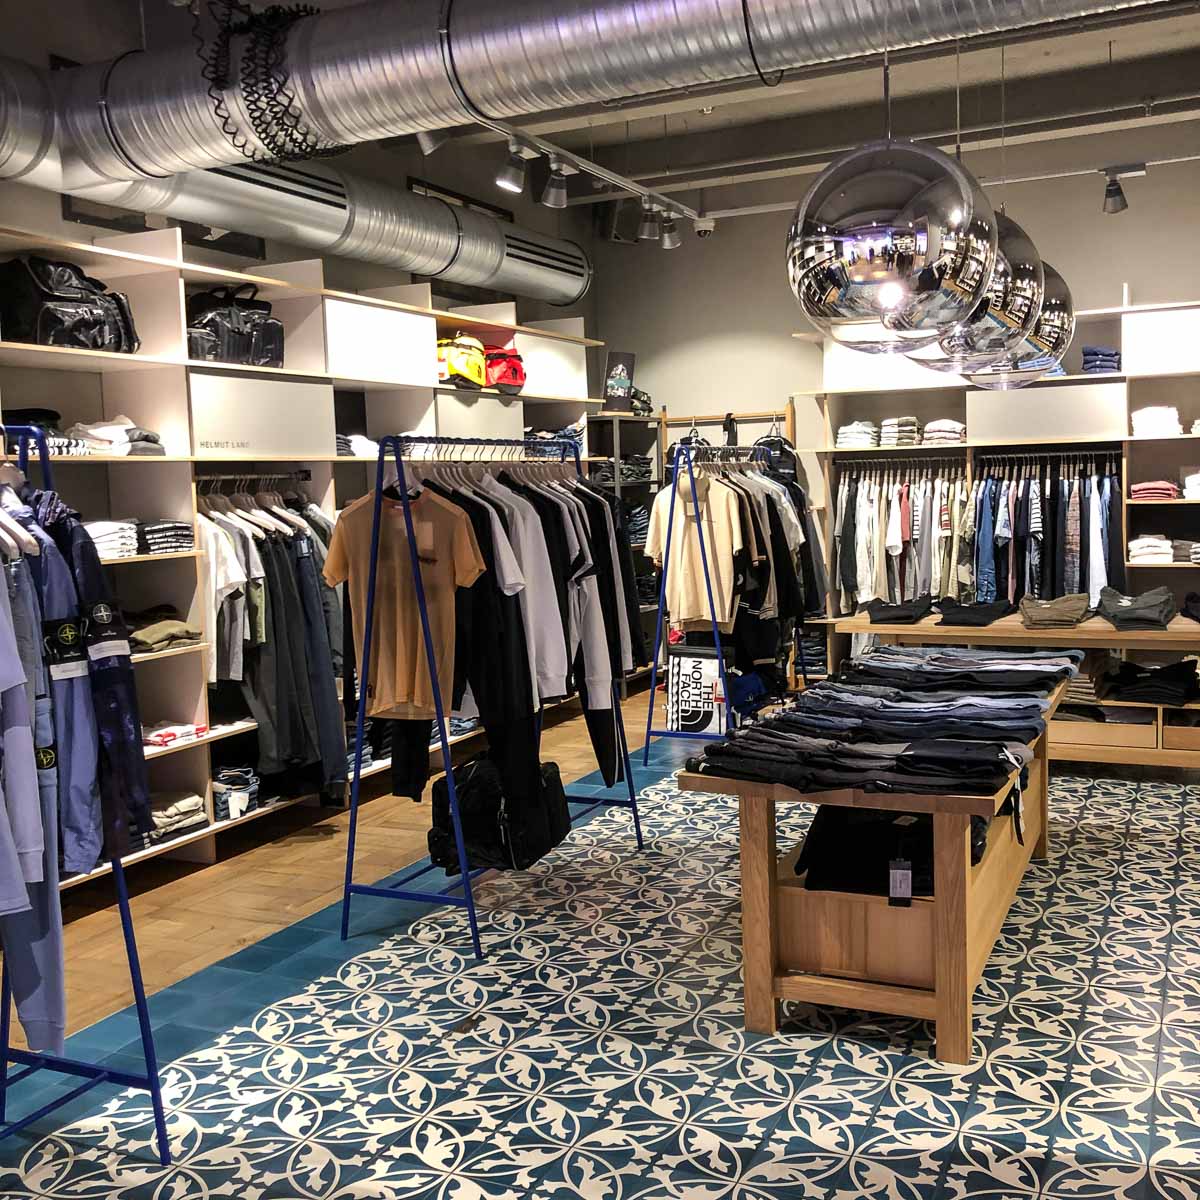 Men’s Clothing and fashion: Where to Shop? - The Frankfurt Edit